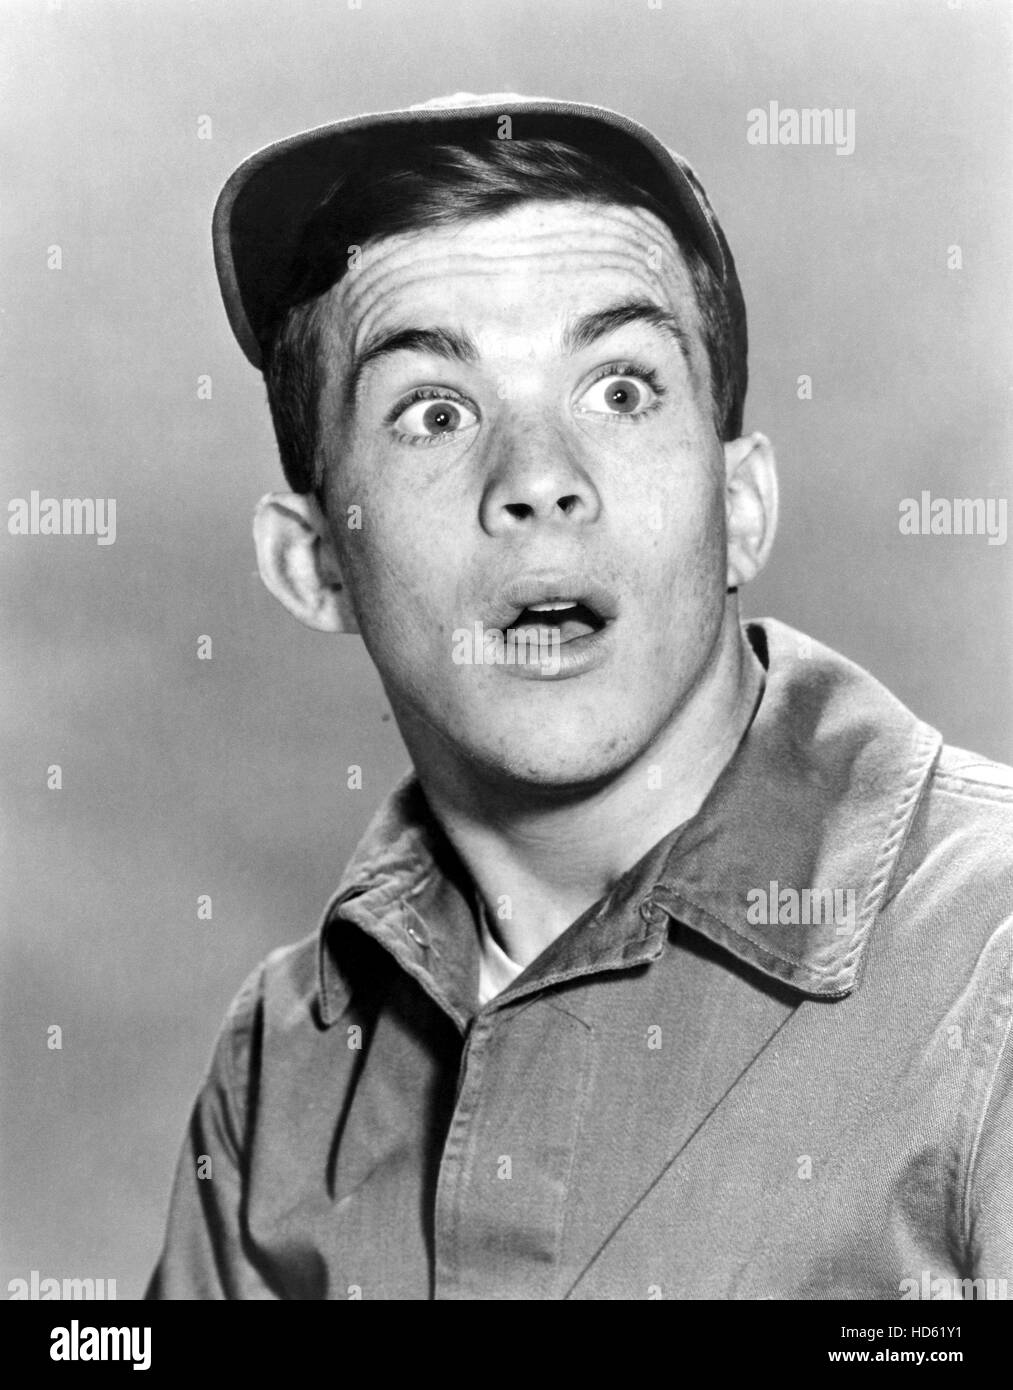 NO TIME FOR SERGEANTS, Kevin O'Neal, 1964 Stock Photo - Alamy